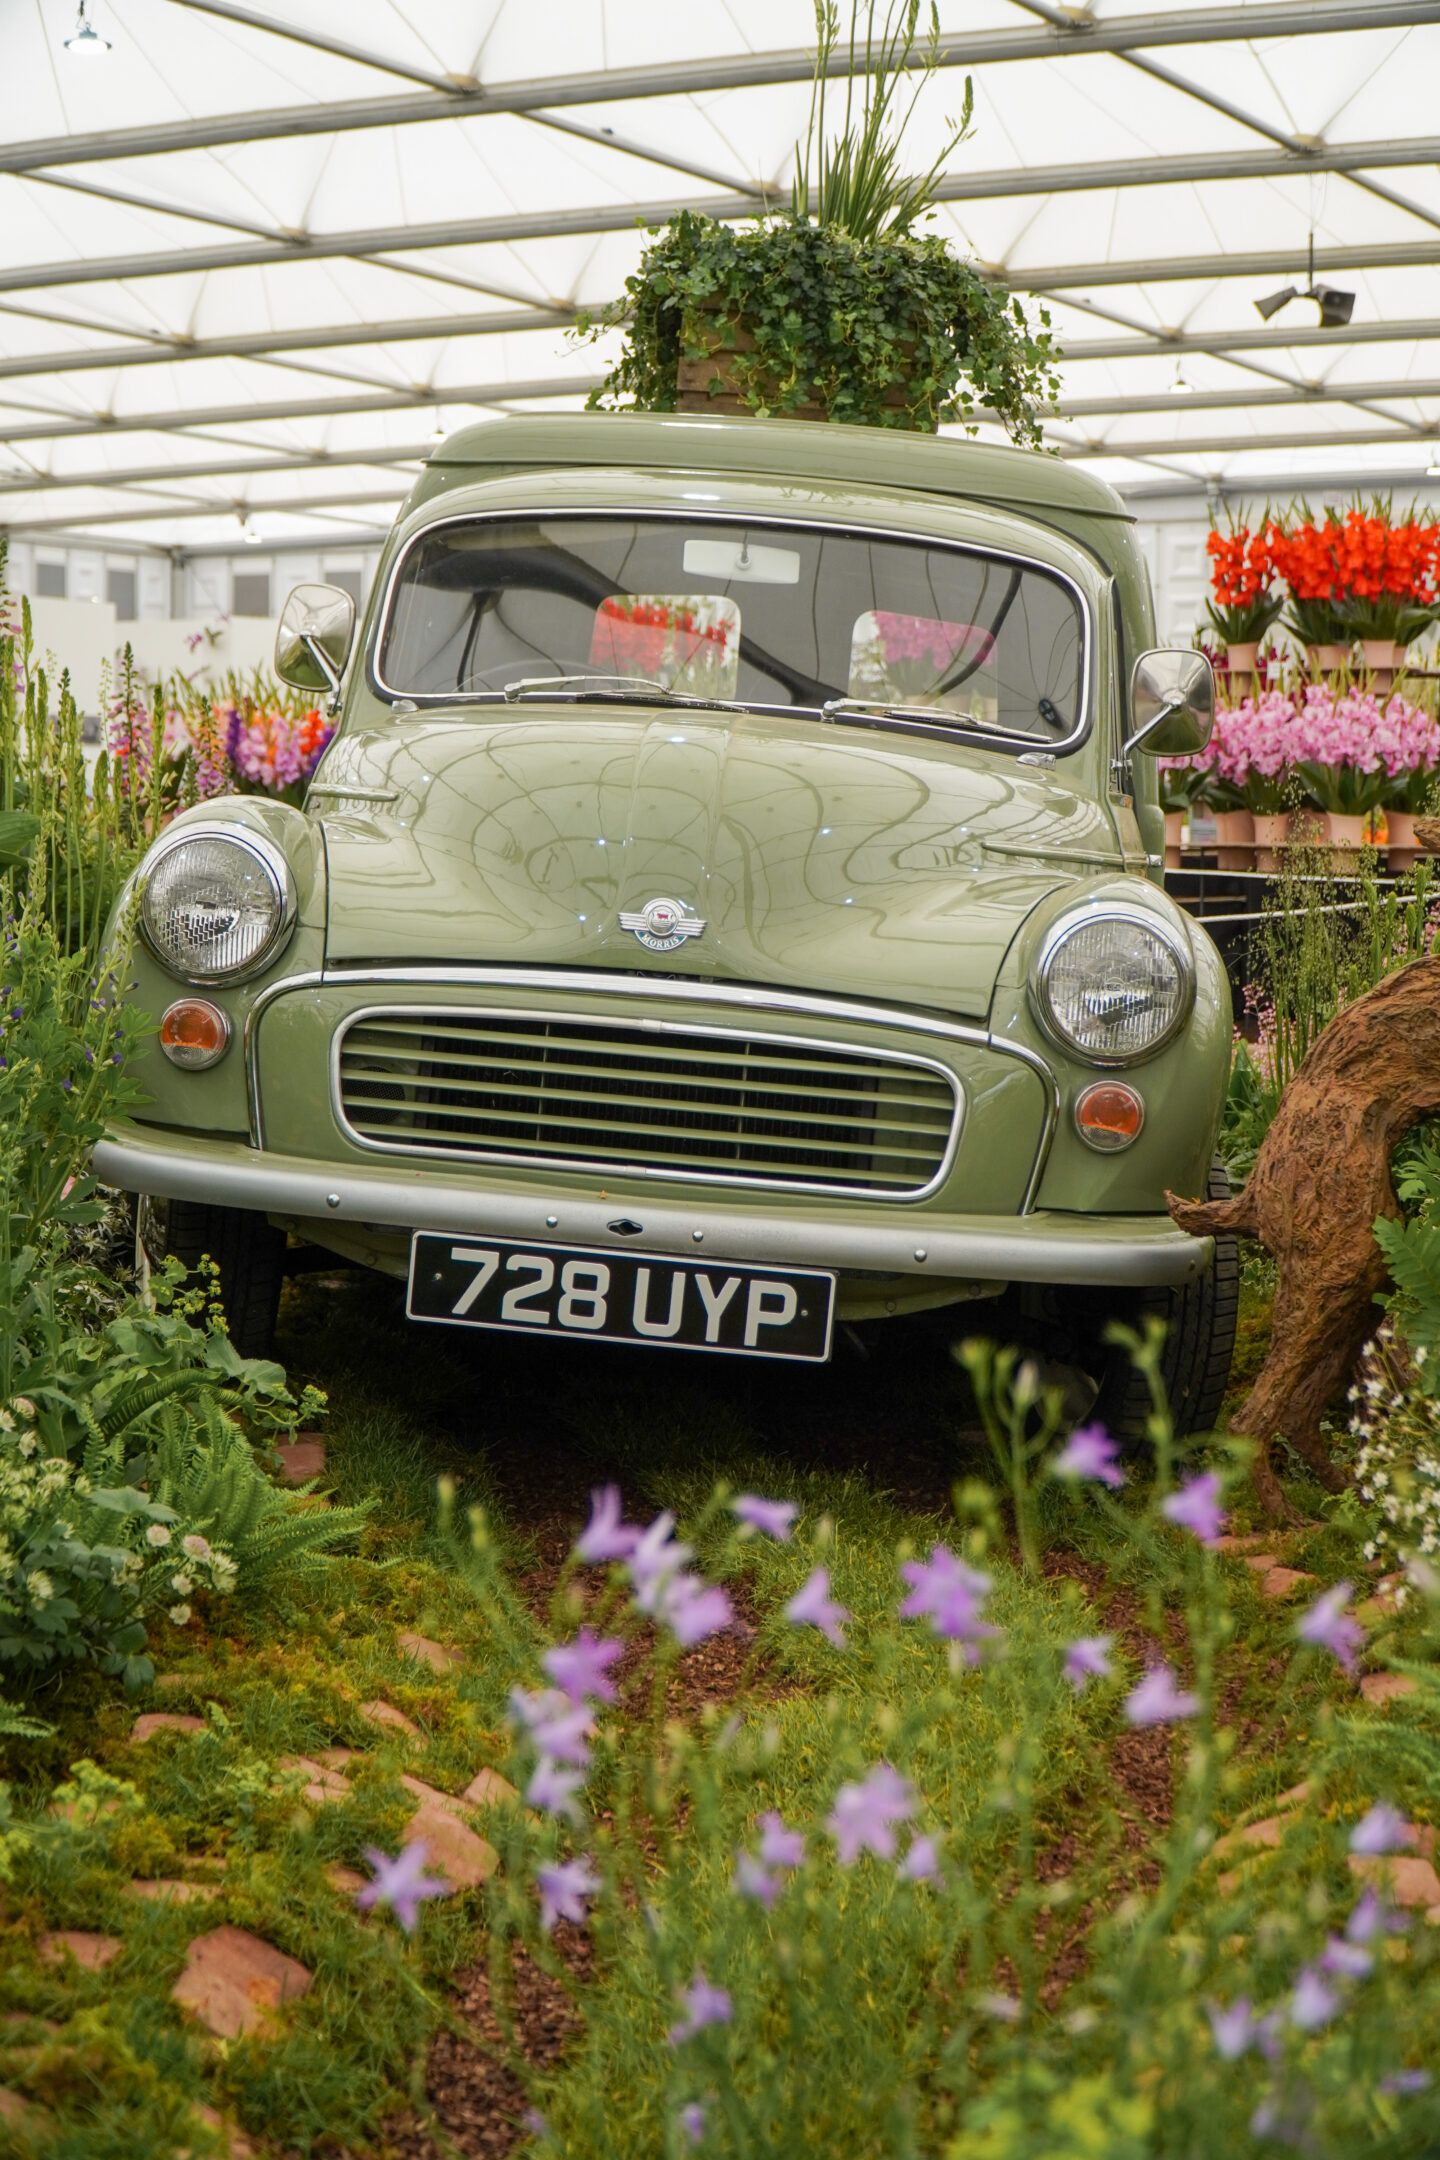 Green car in a floral display at the RHS Chelsea Flower show